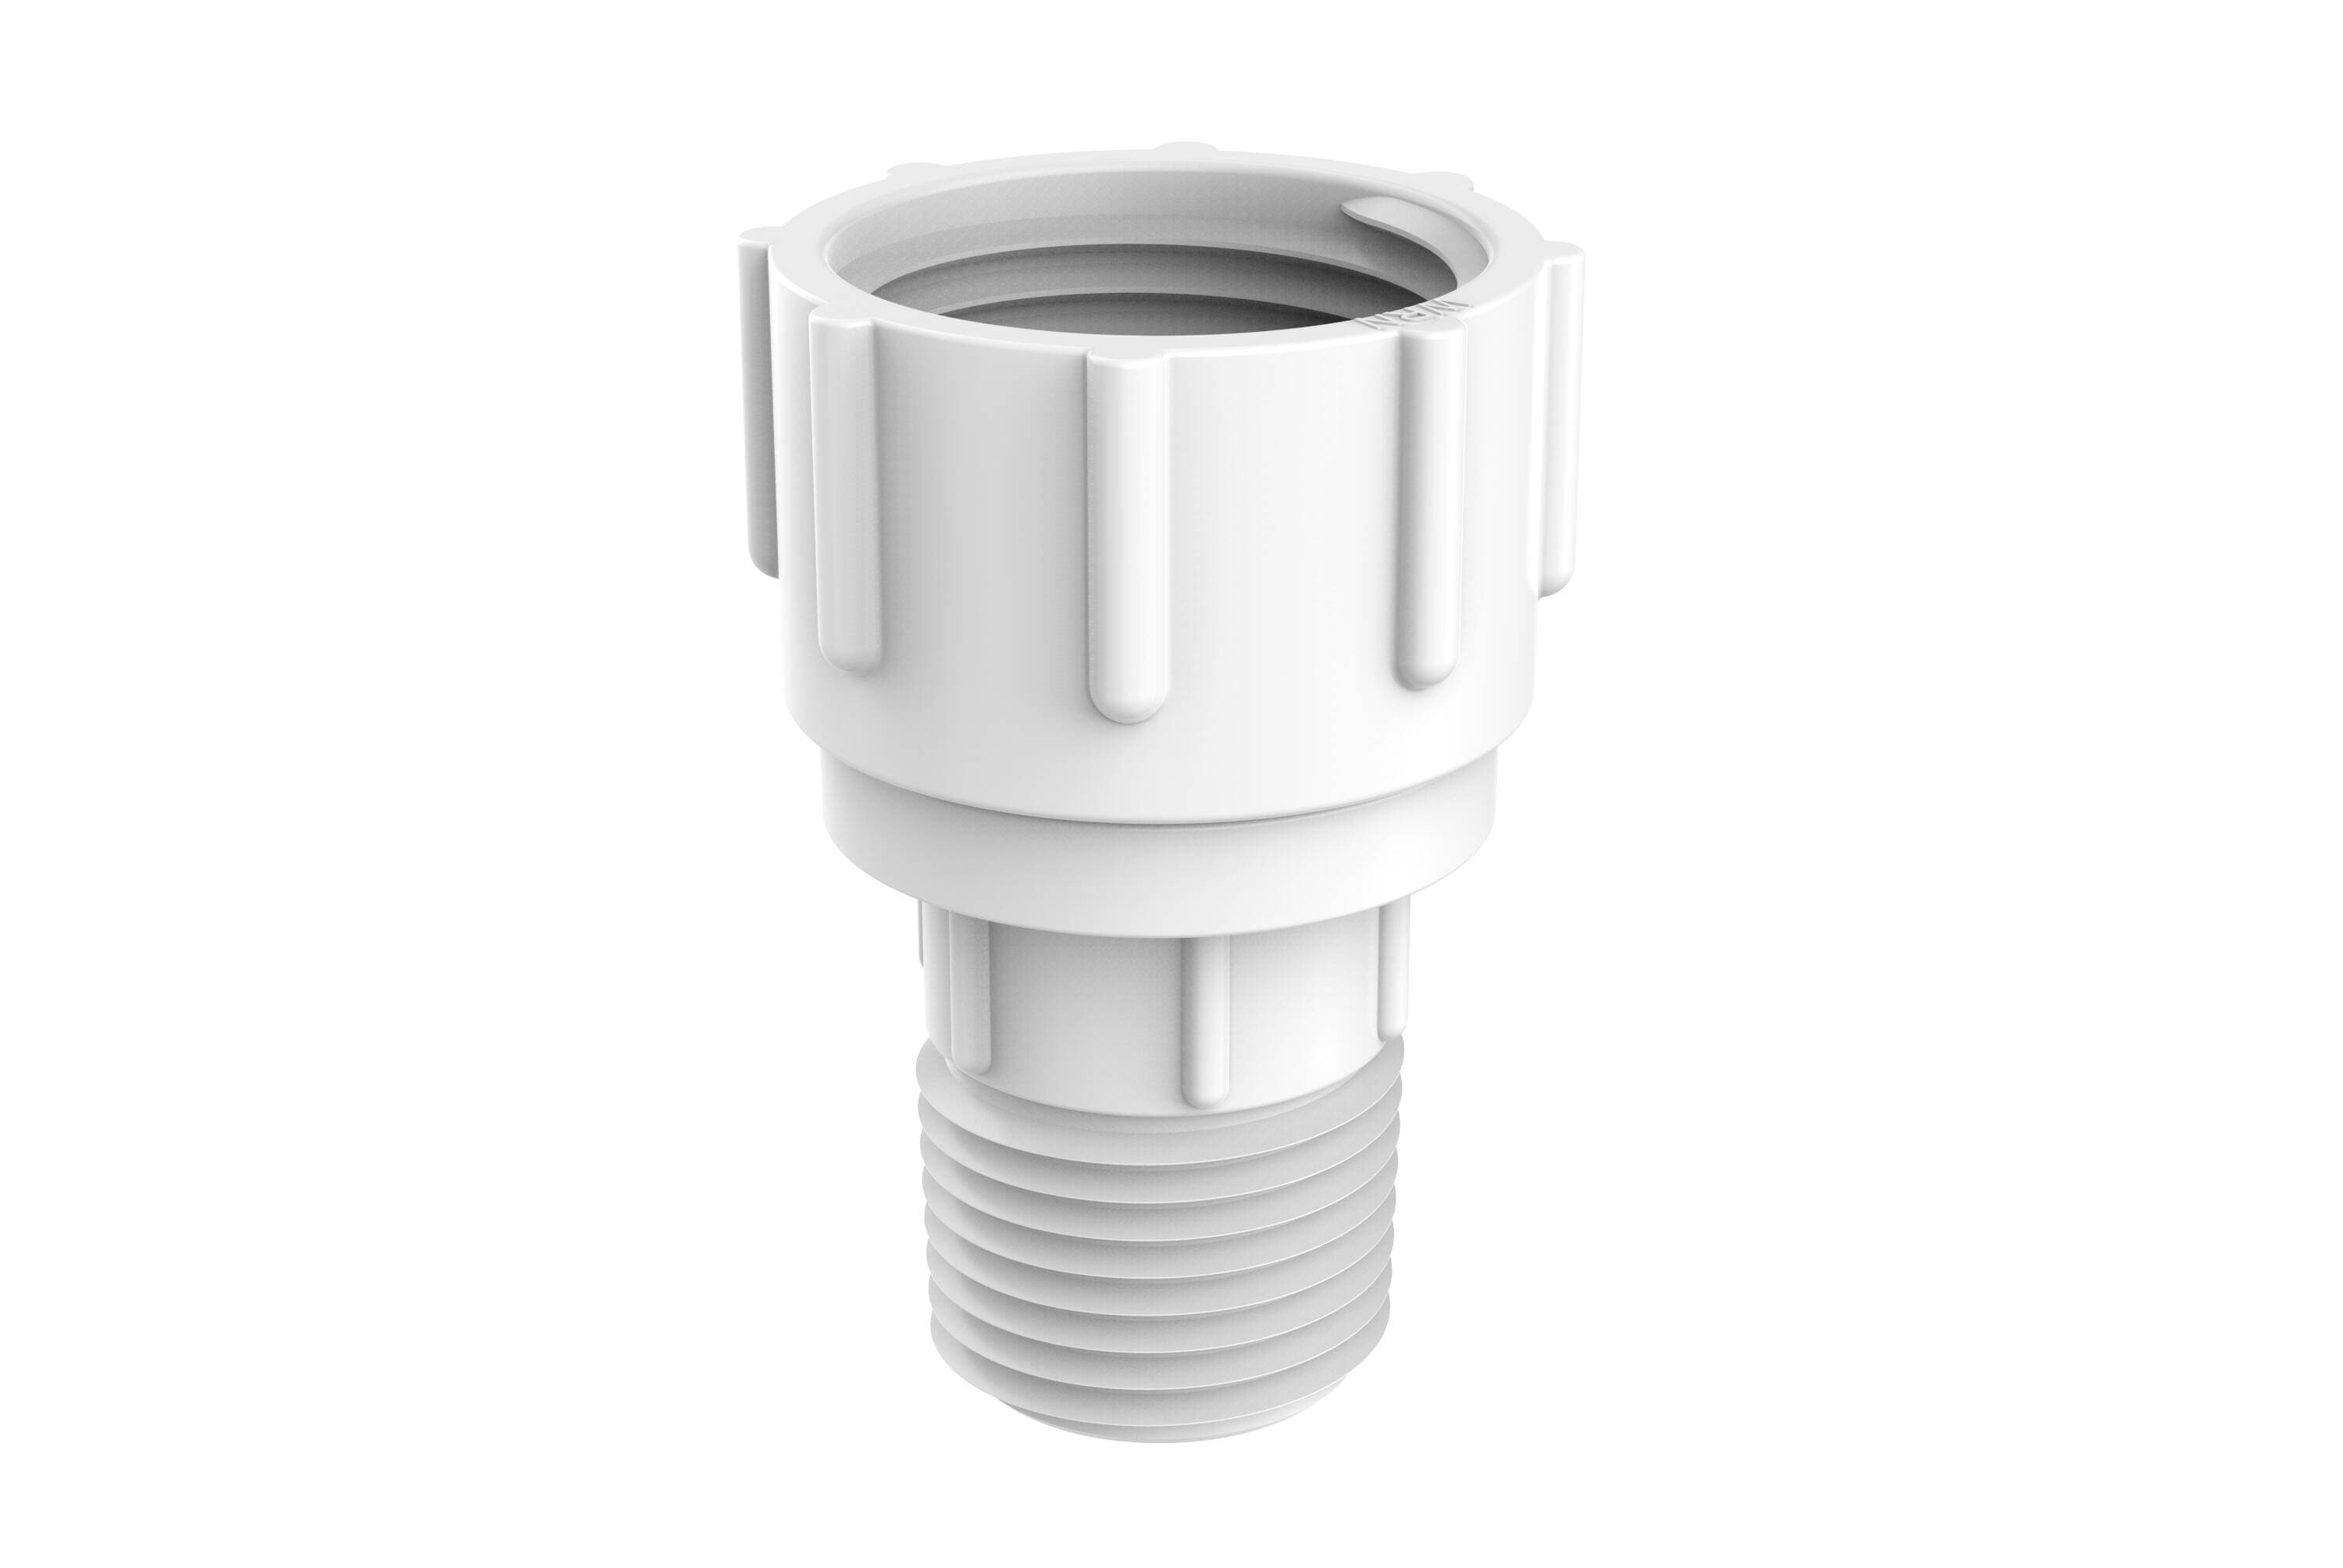 Pipe Fitting Buying Guide